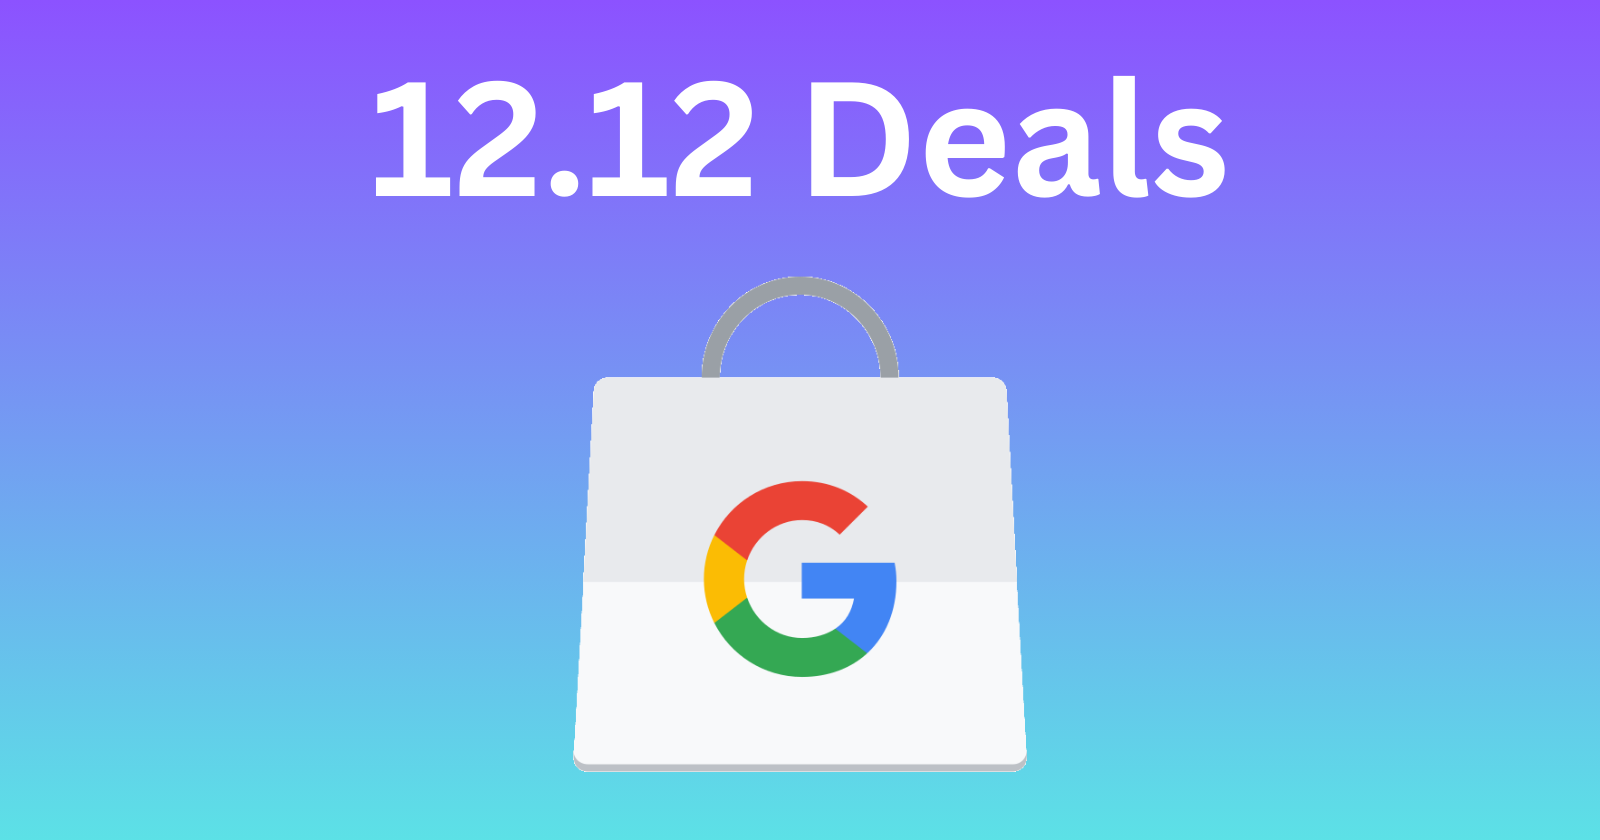 Google Store's exclusive 12.12 deals on Google Pixel accessories are live in Singapore